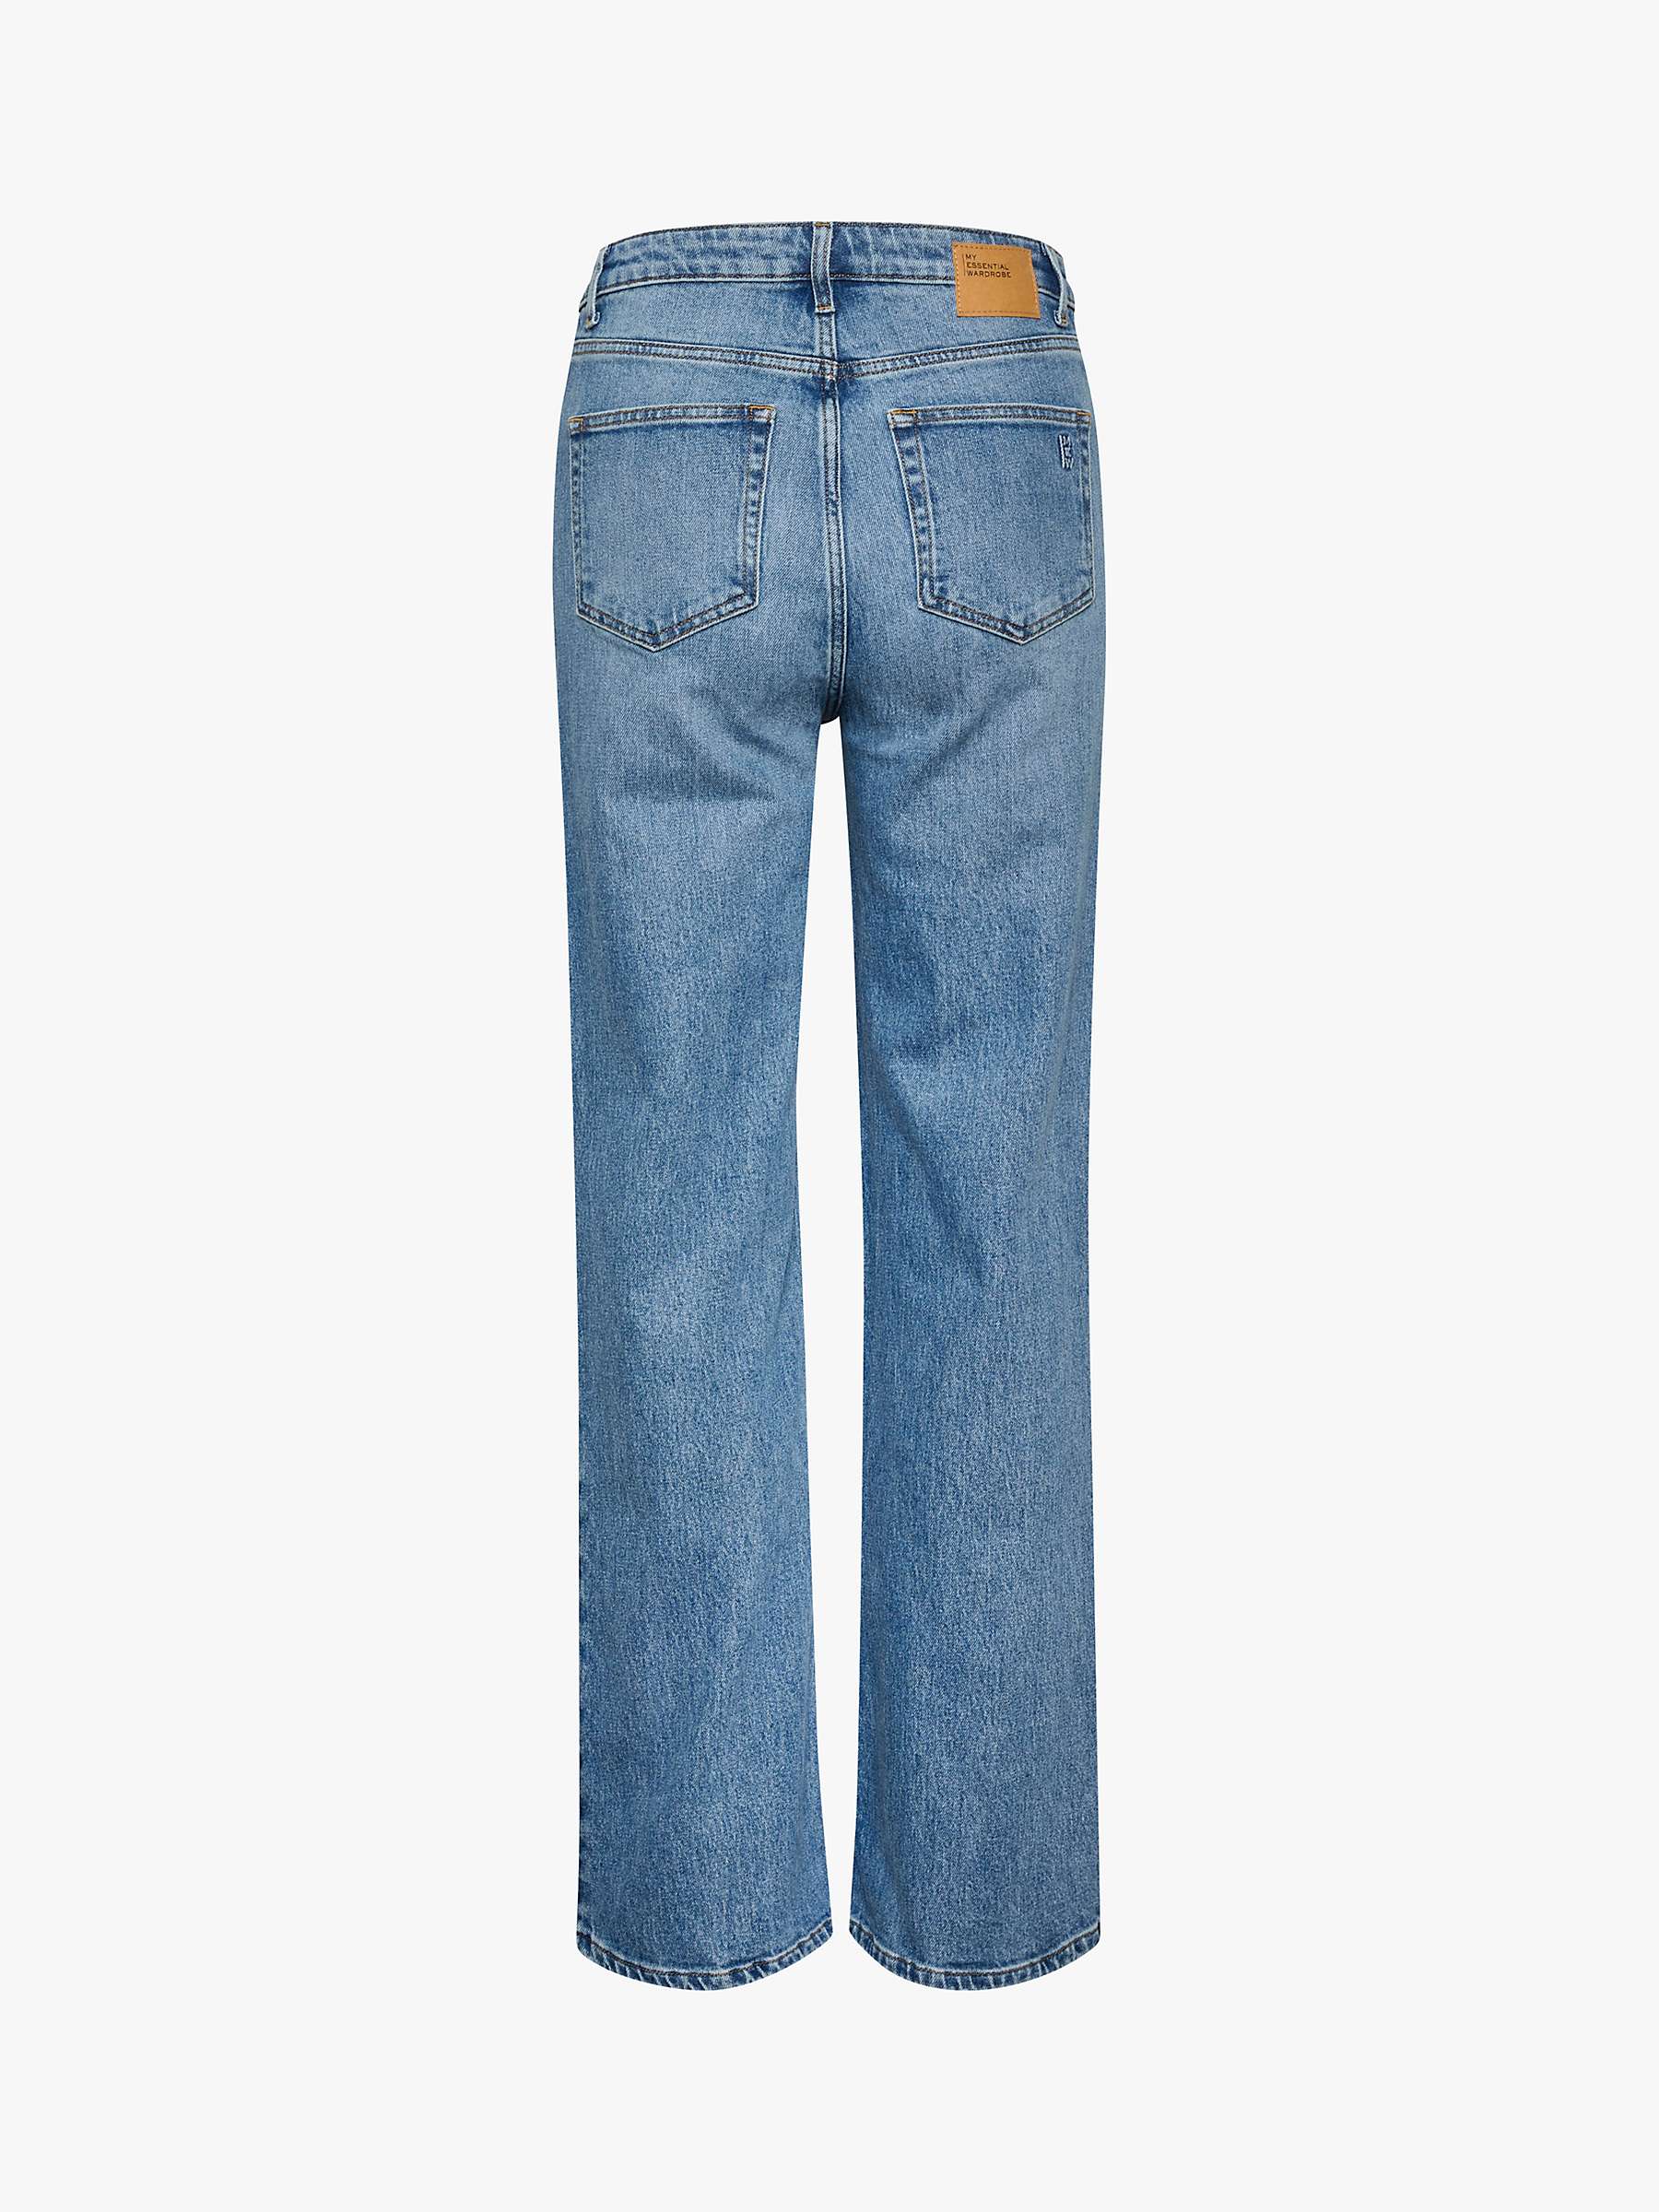 Buy MY ESSENTIAL WARDROBE Louis High Waisted Wide Leg Jeans Online at johnlewis.com